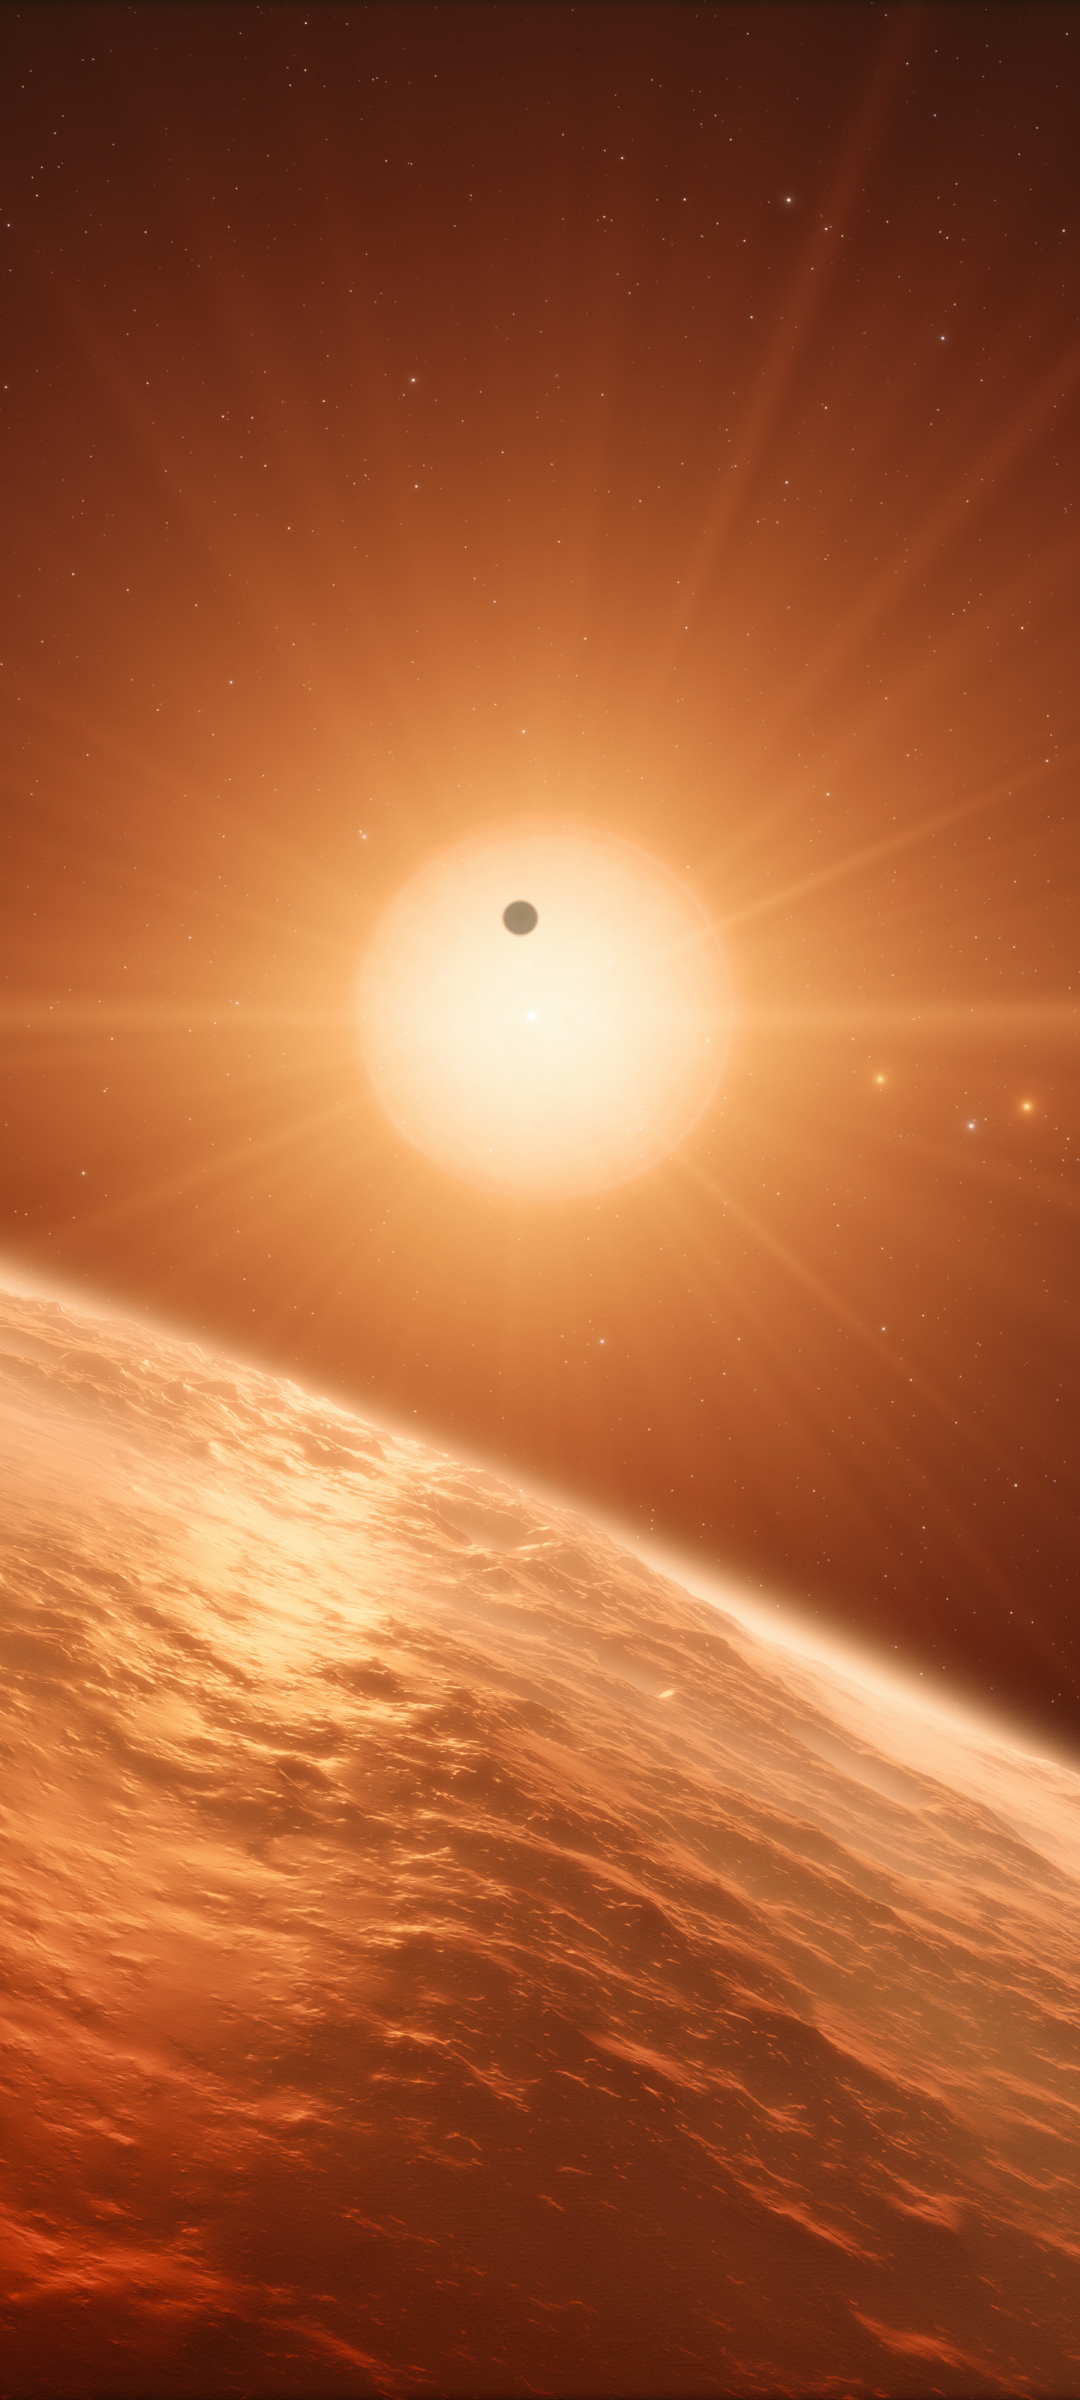 Artist’s impression of the TRAPPIST-1 planetary system by ESO